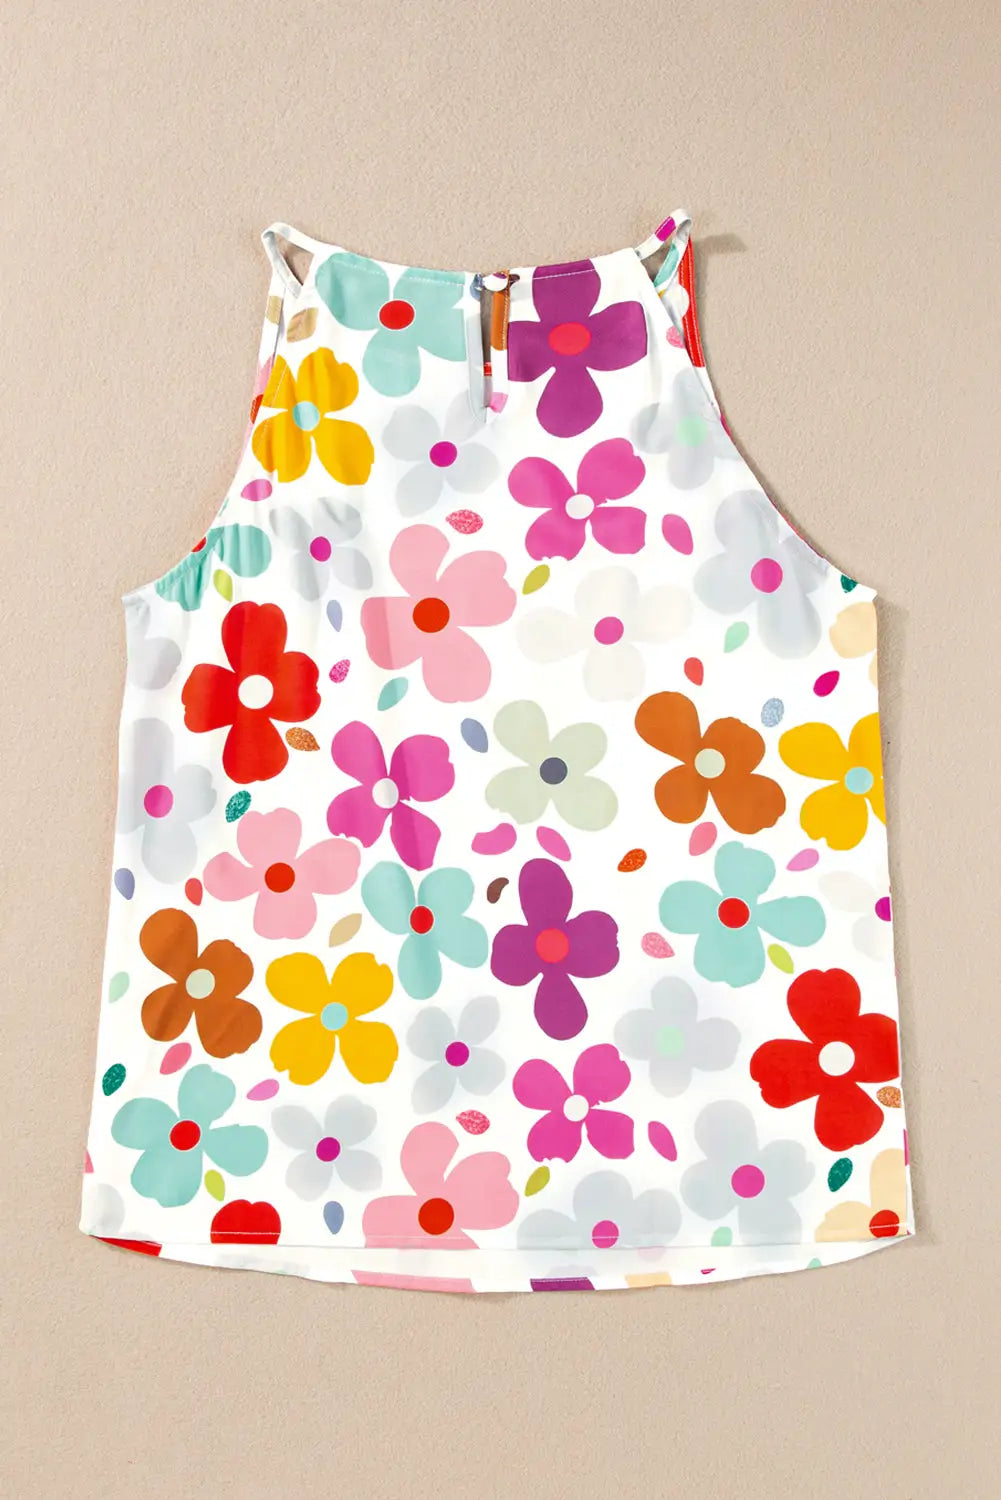 White cute floral tank top - tops/tank tops